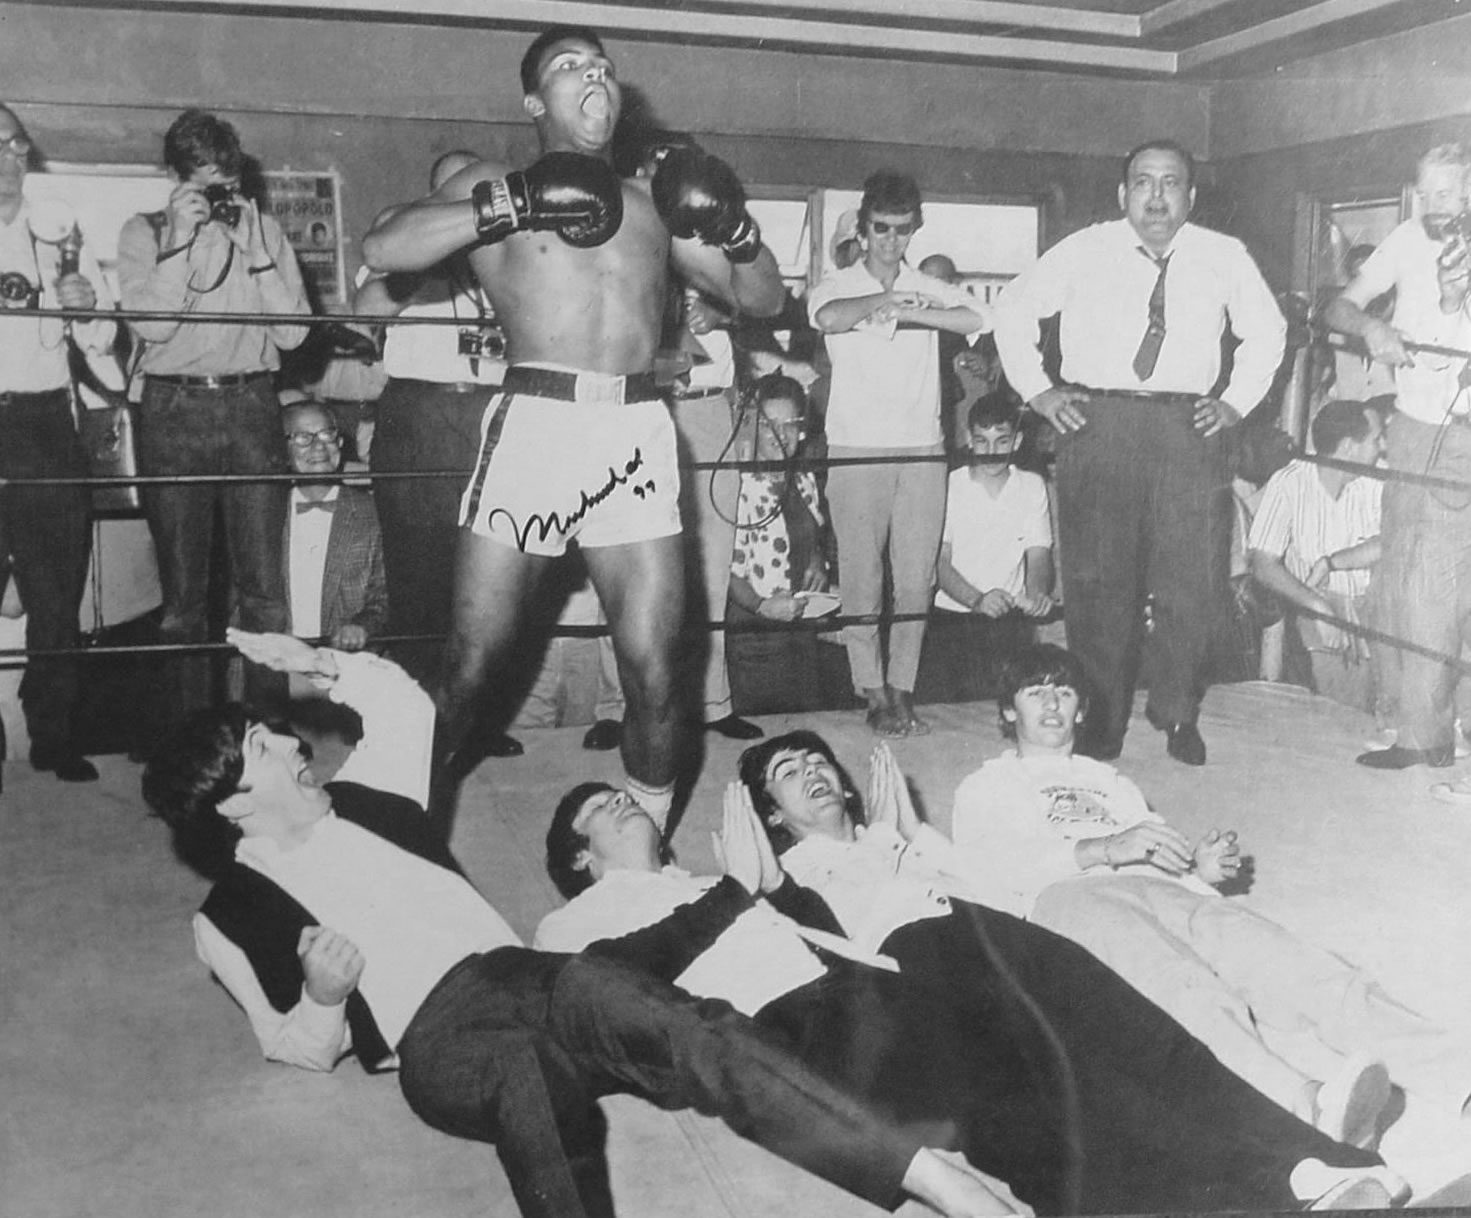 The Beatles and Muhammad Ali (Cassius Clay)